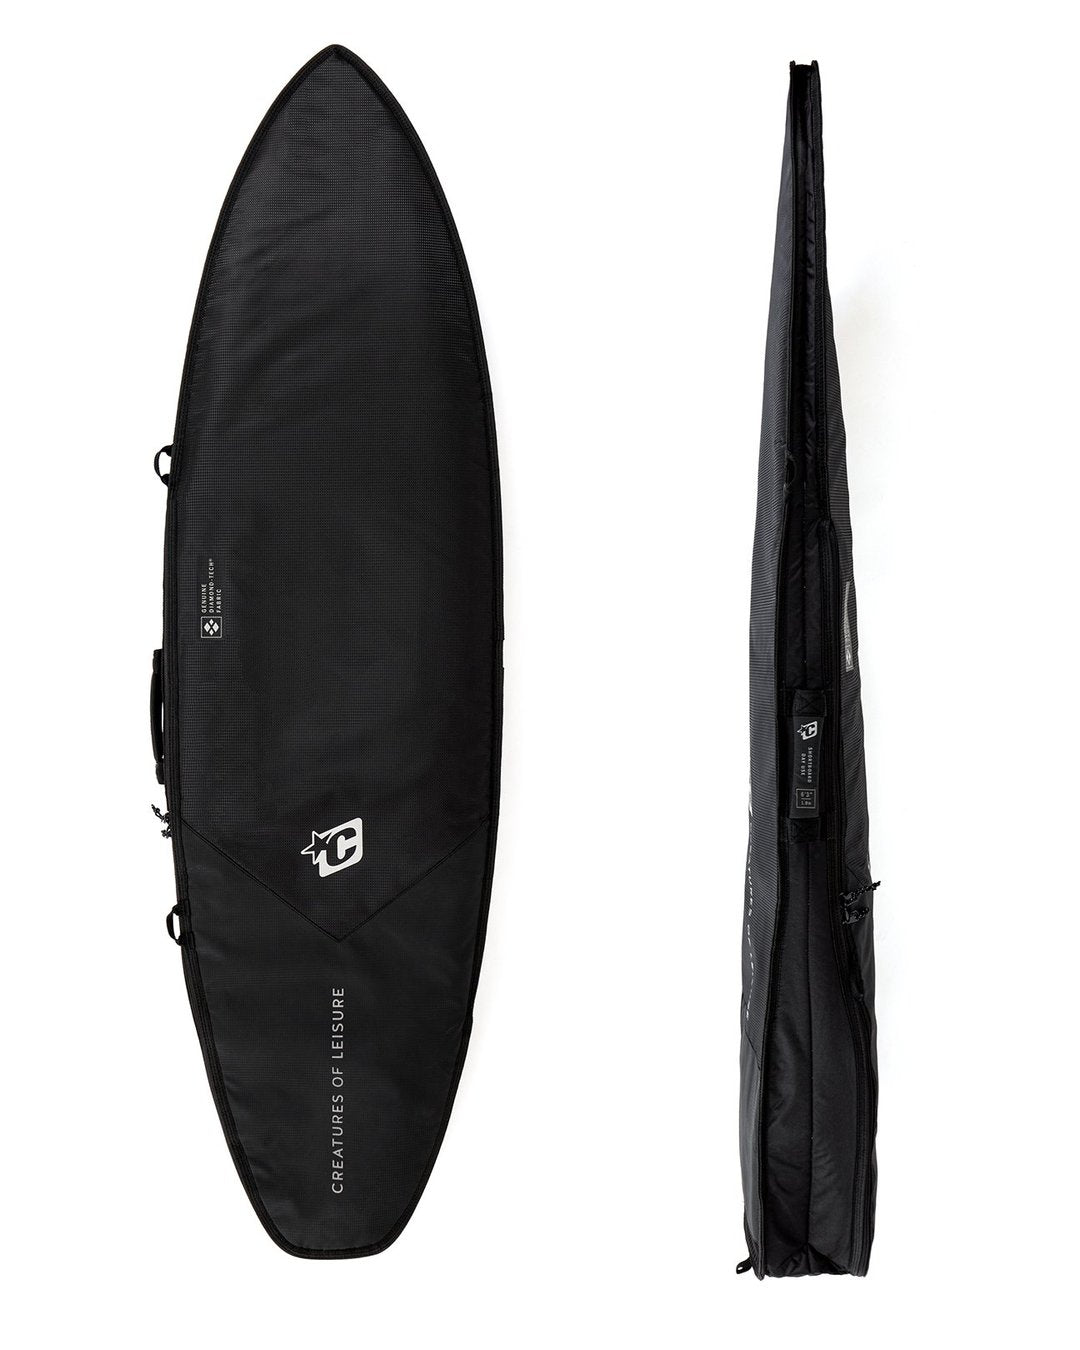 Creatures SHORTBOARD DAY USE DT2.0 6'7" : BLACK SILVER - Board Store CreaturesBoardcover  